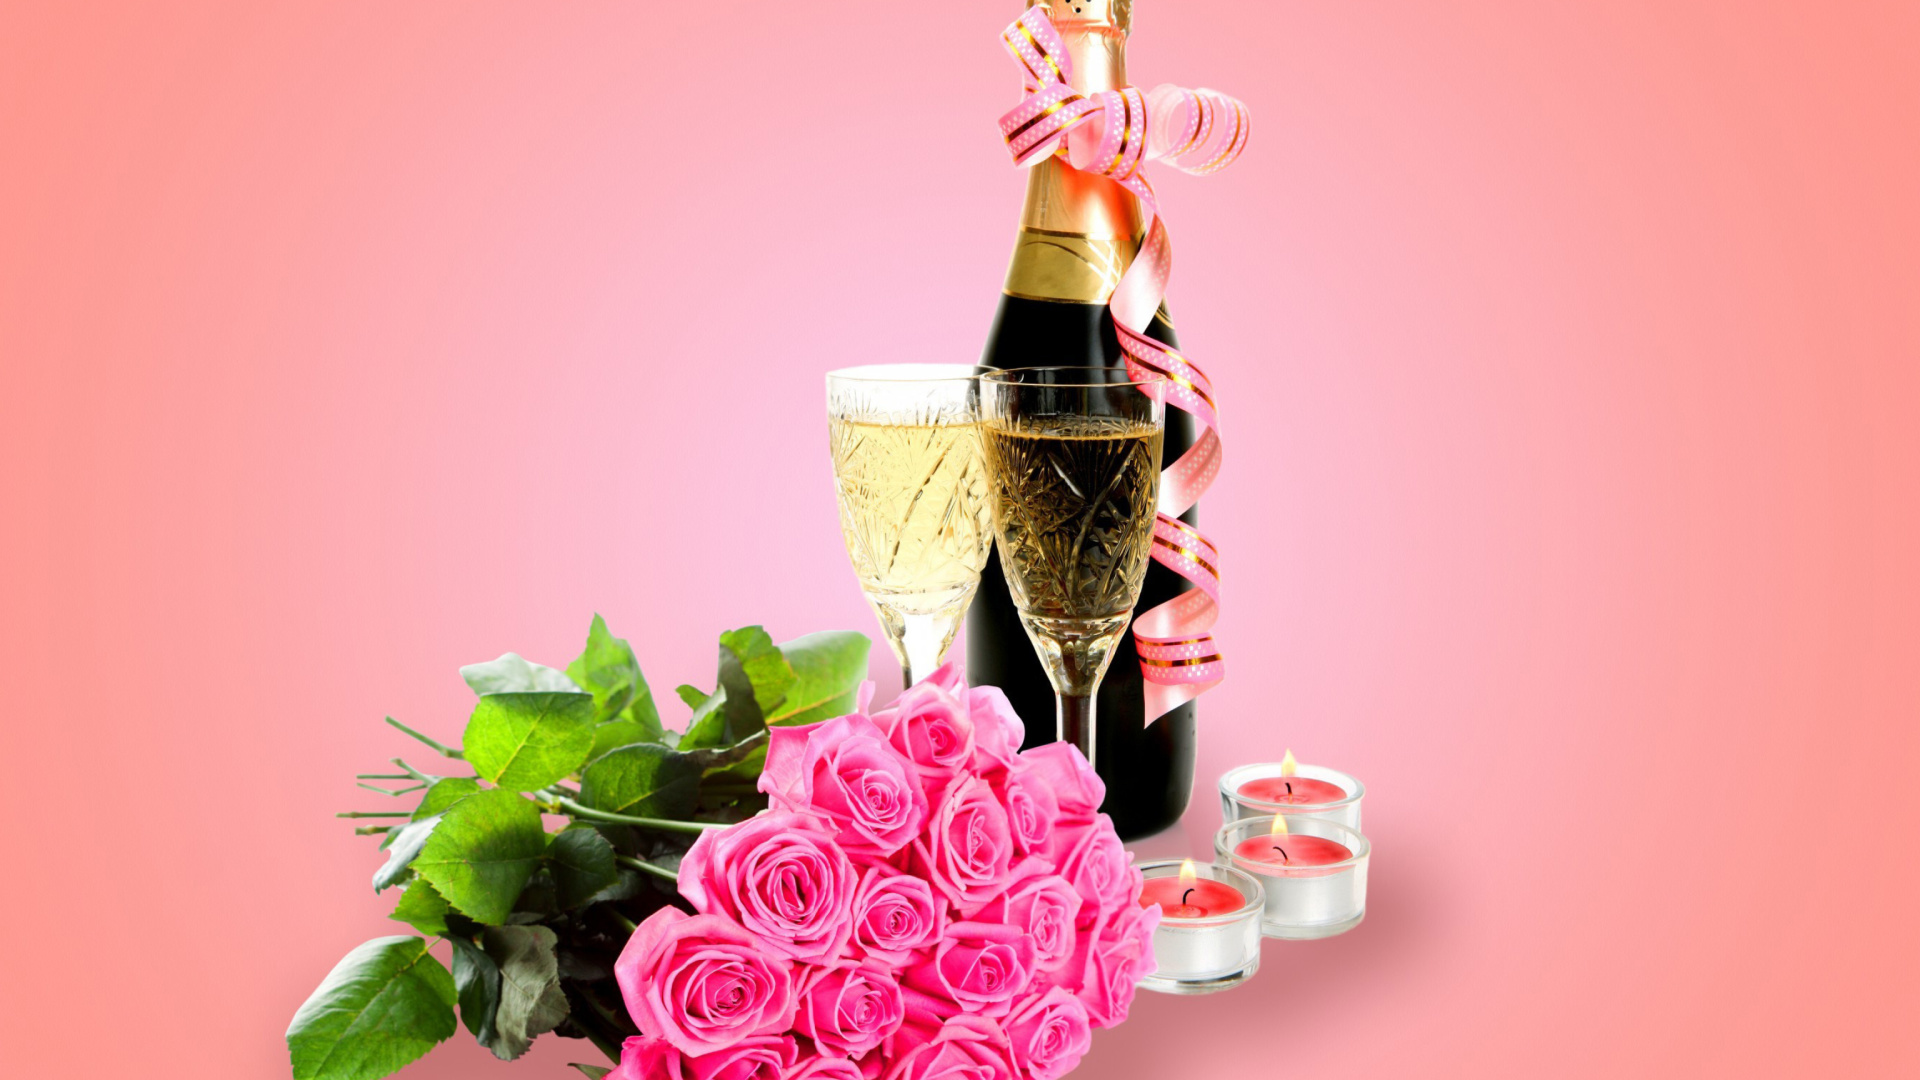 Clipart Roses Bouquet and Champagne screenshot #1 1920x1080